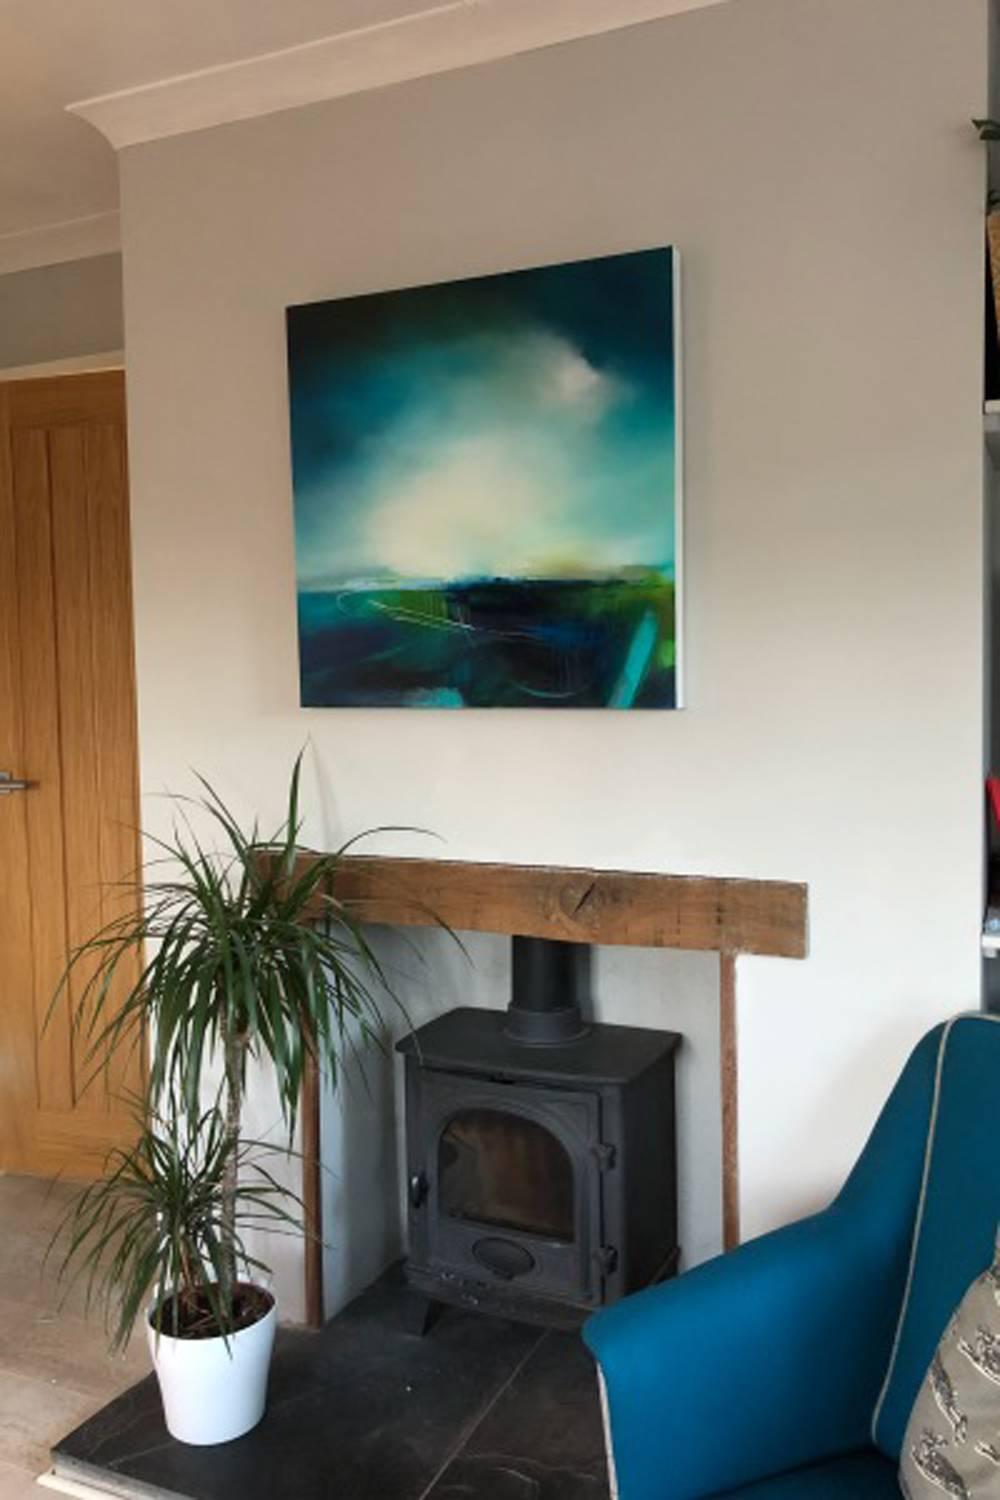 Laura Rich's original painting ‘Wolf Alice on 6Music' is an original oil painting on boxed linen canvas.
This contemporary abstract piece has ben inspired by the landscape surrounding Rich's home in Wiltshire and also a response to her listening to